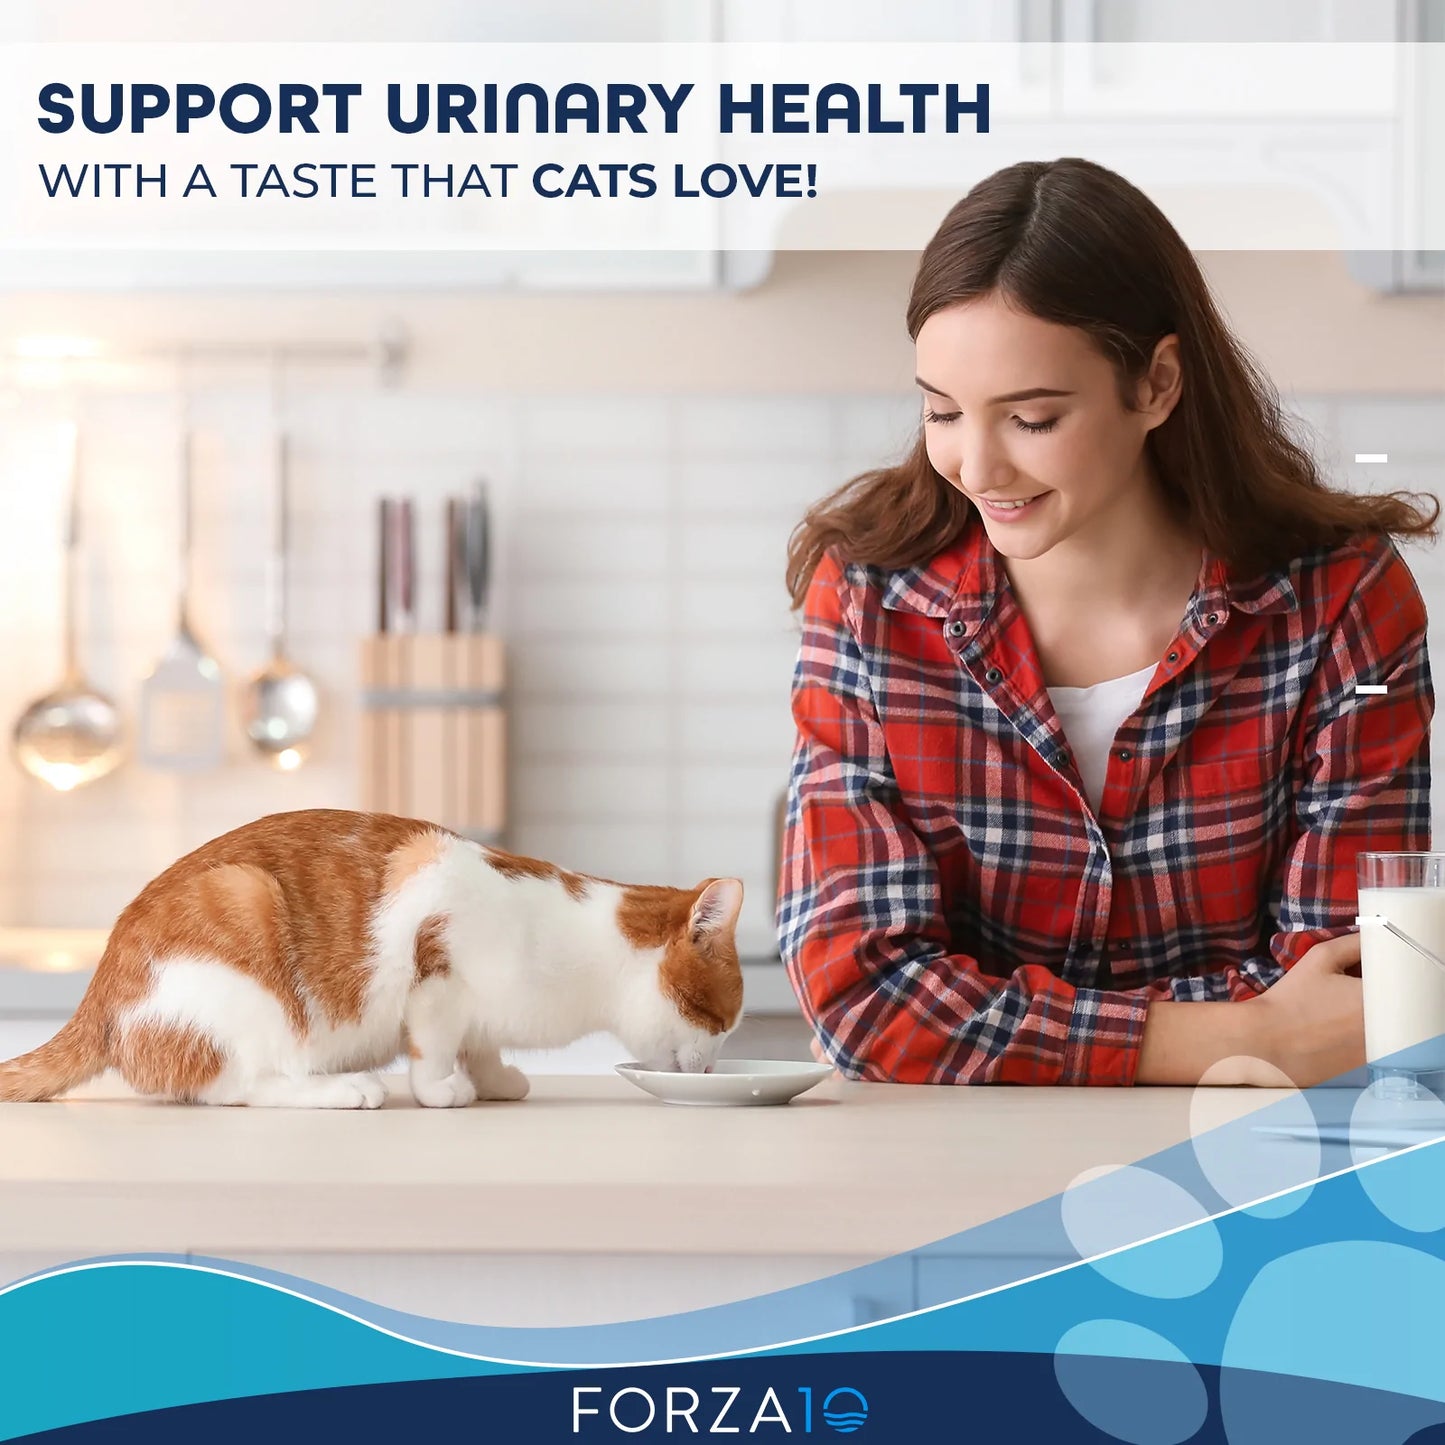 FORZA10 NUTRACEUTIC ACTIVE URINARY DRY CAT FOOD